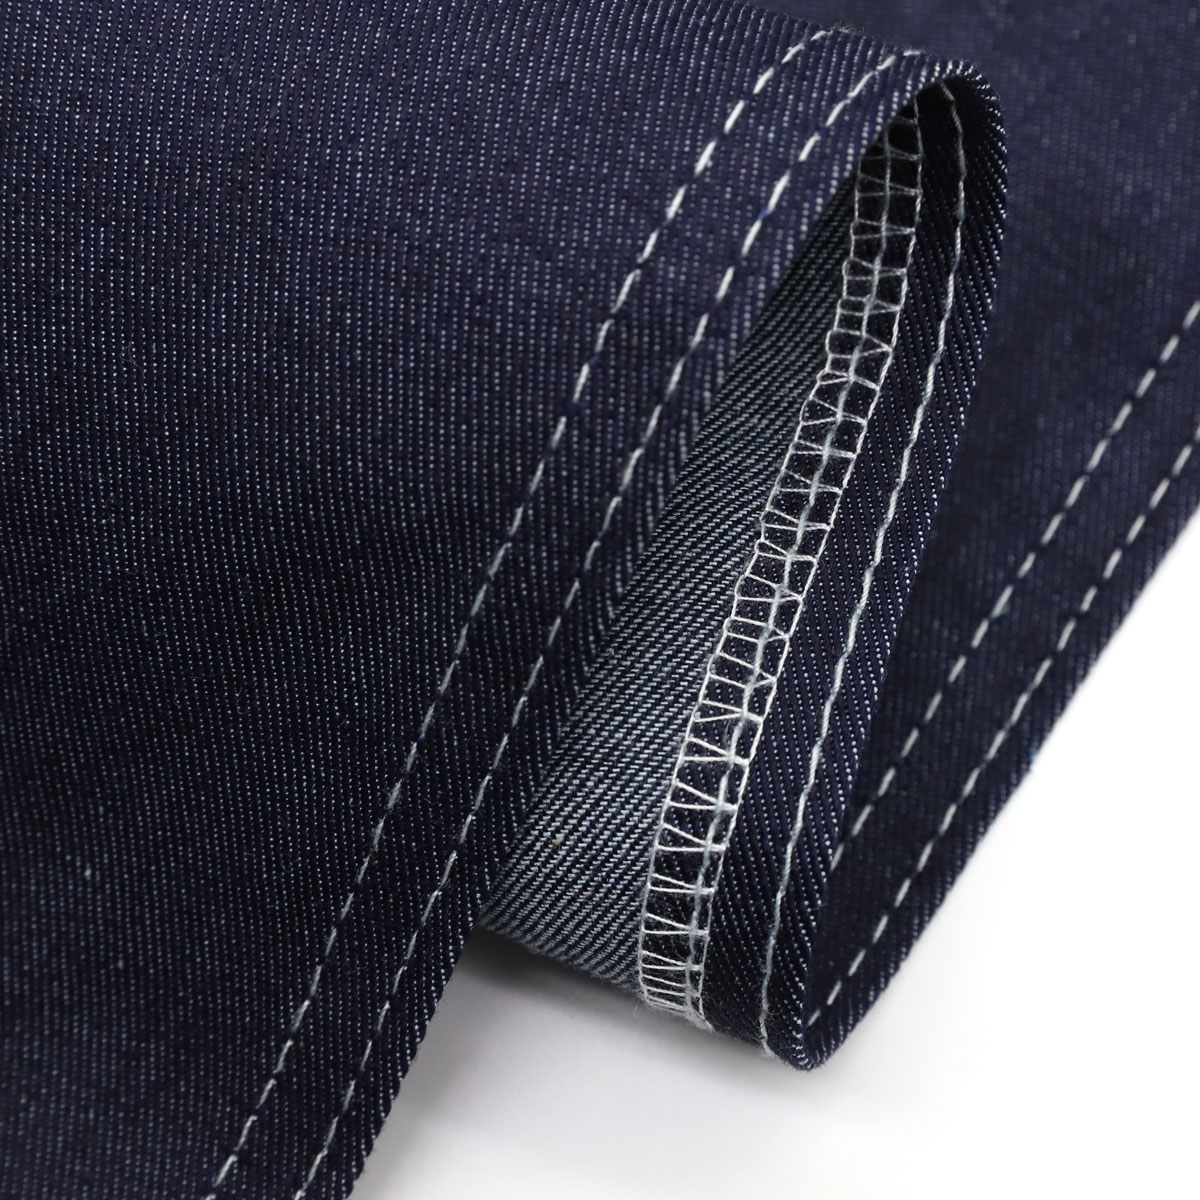 High-quality Jeans Fabric Material Manufacturers 2